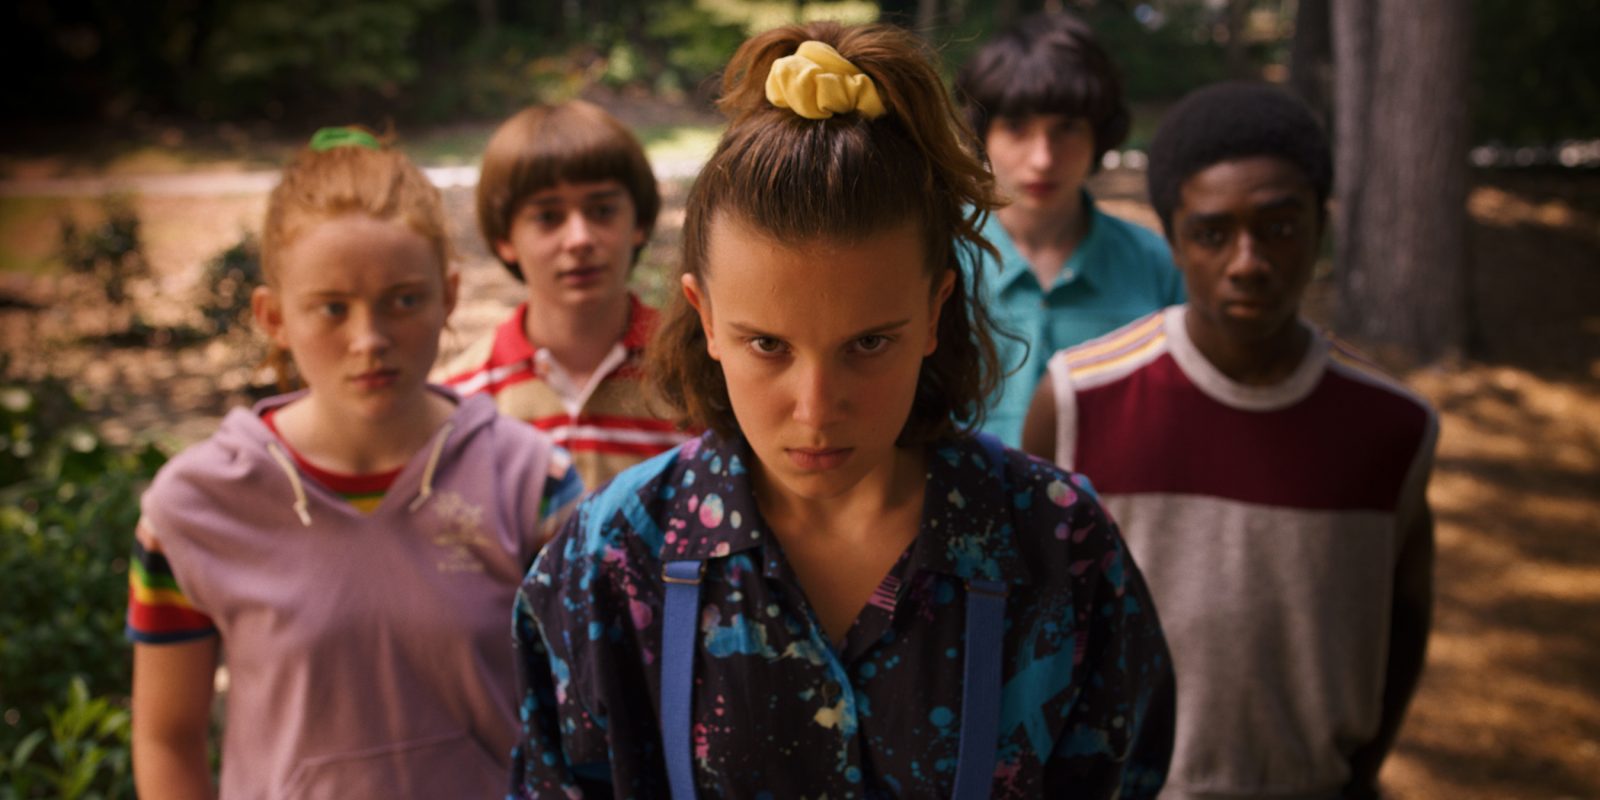 Can We Guess Your Age Based on the TV Characters You Find Most Attractive? Stranger Things